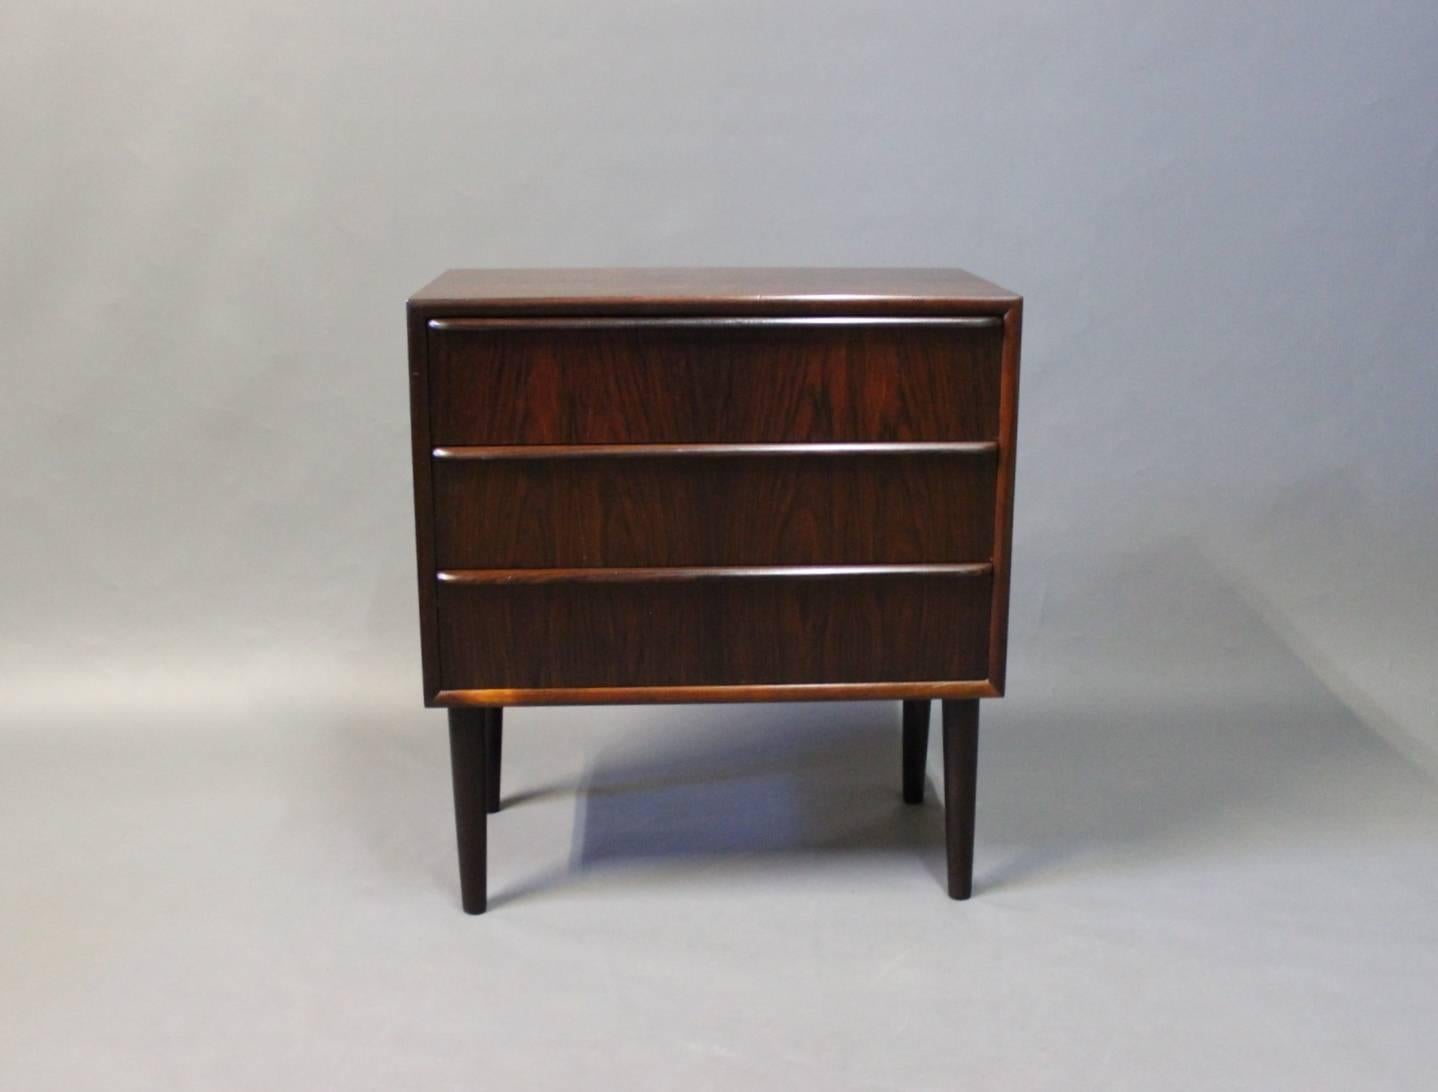 Small chest of drawers in Brazilian rosewood of Danish design from the 1960s. The chest is in great vintage condition.